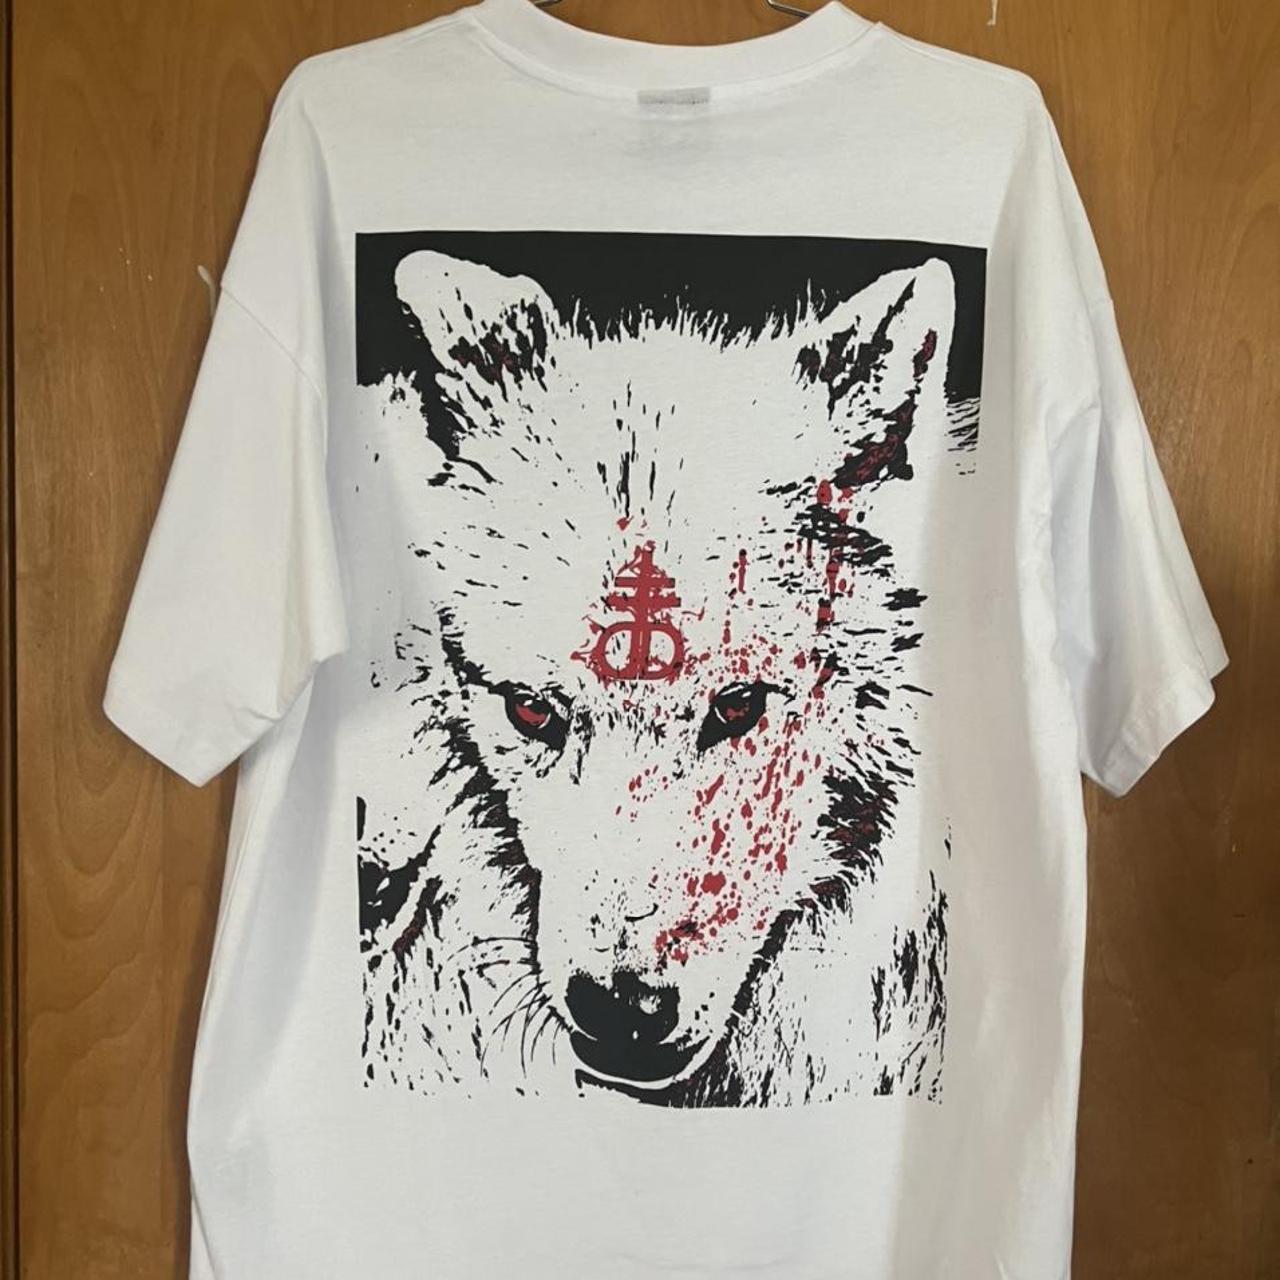 Dropdead Men's White and Red T-shirt (2)